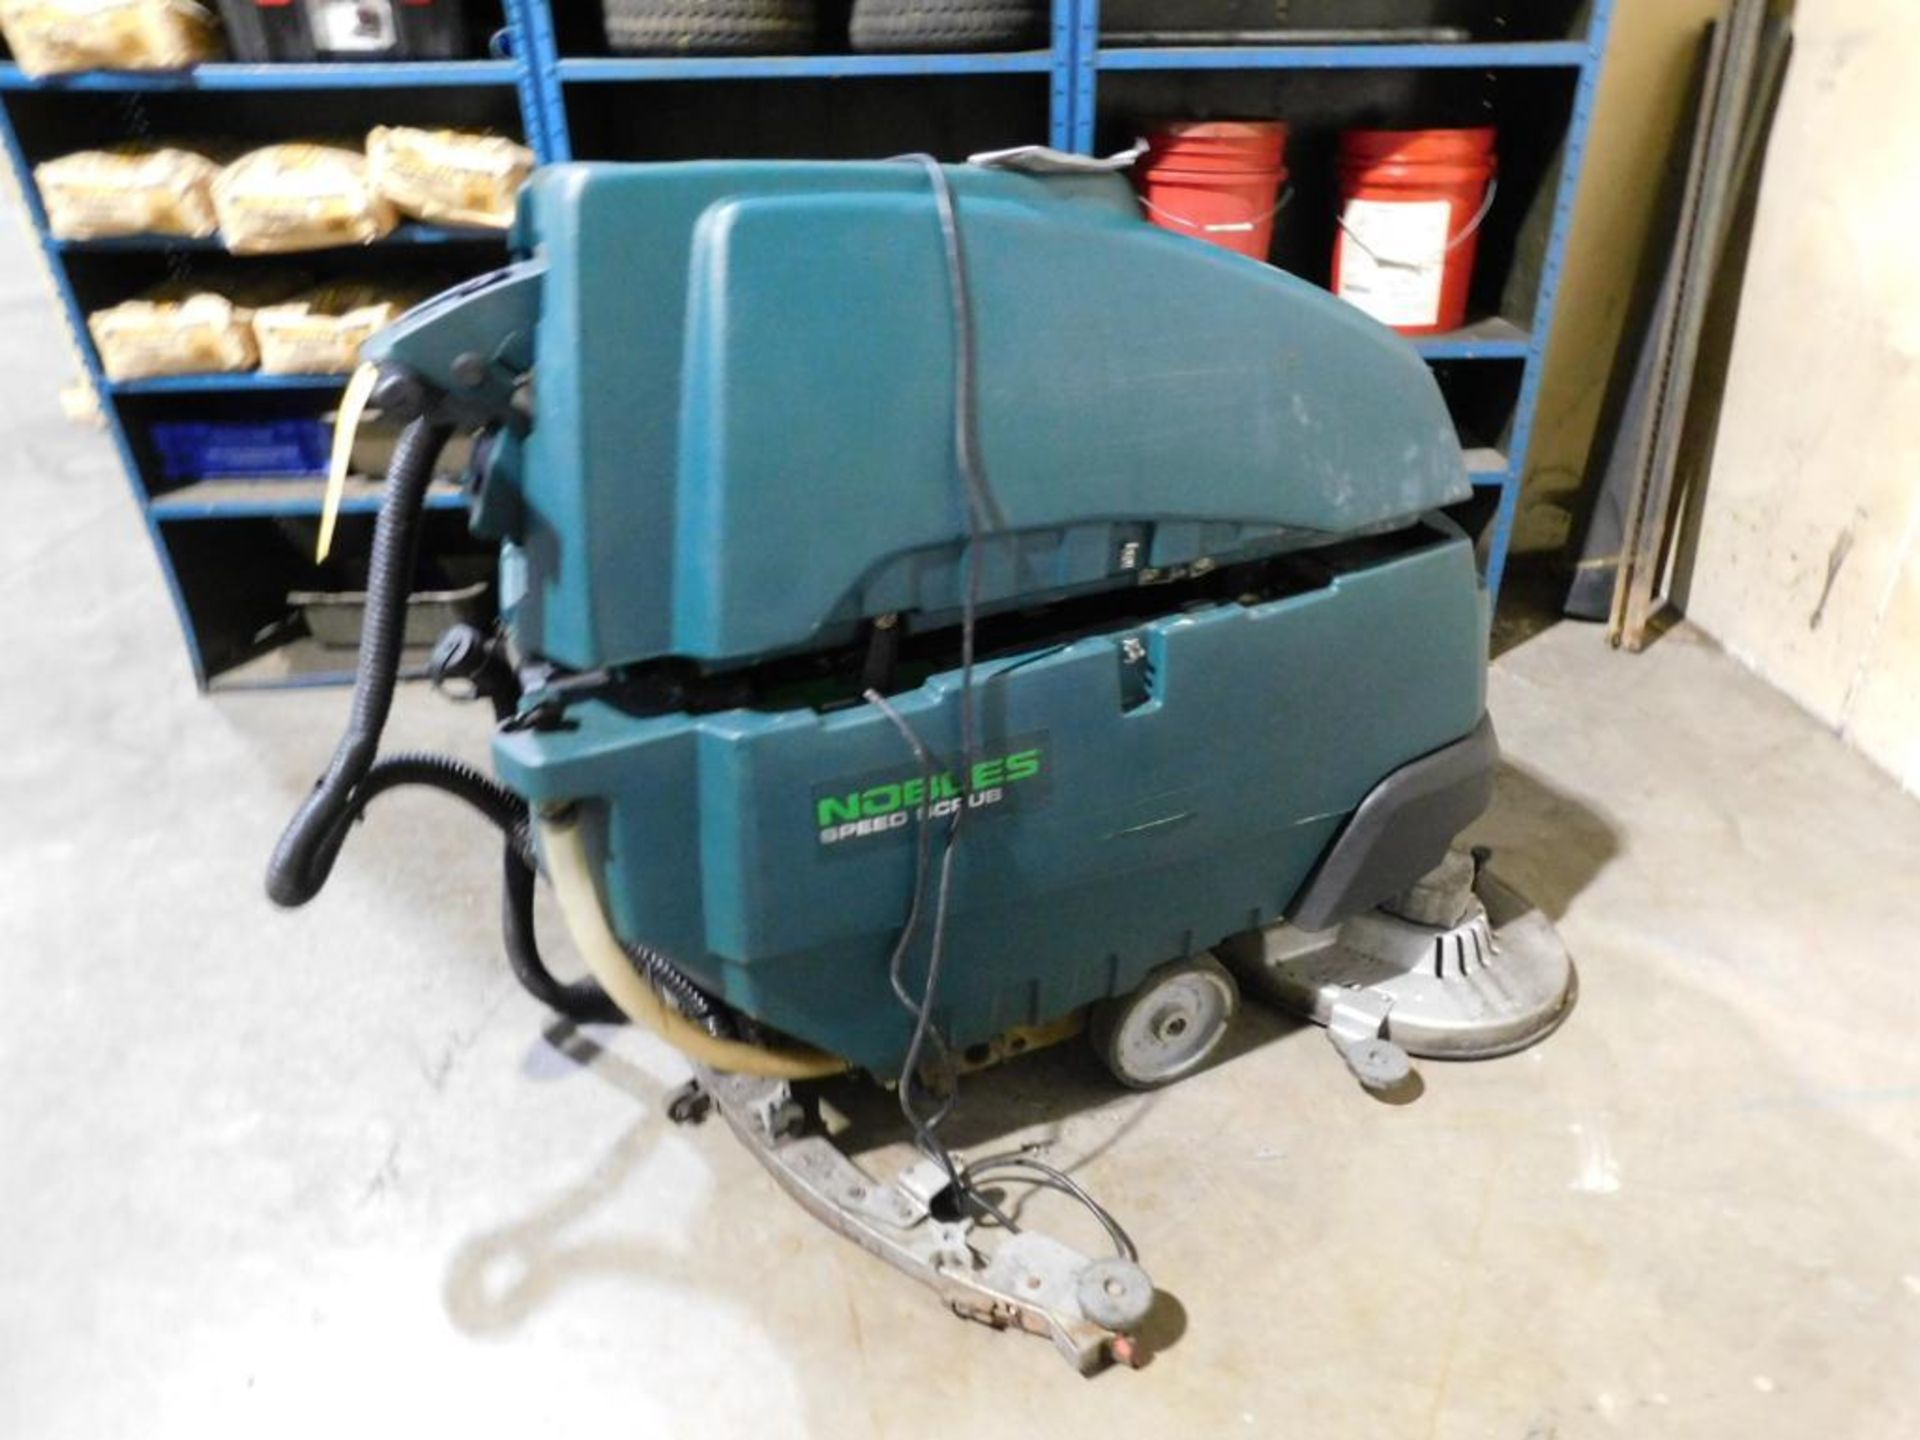 Nobles Speed Scrub Walk Behind Floor Scrubber, 997 Indicated Hours - Image 3 of 6